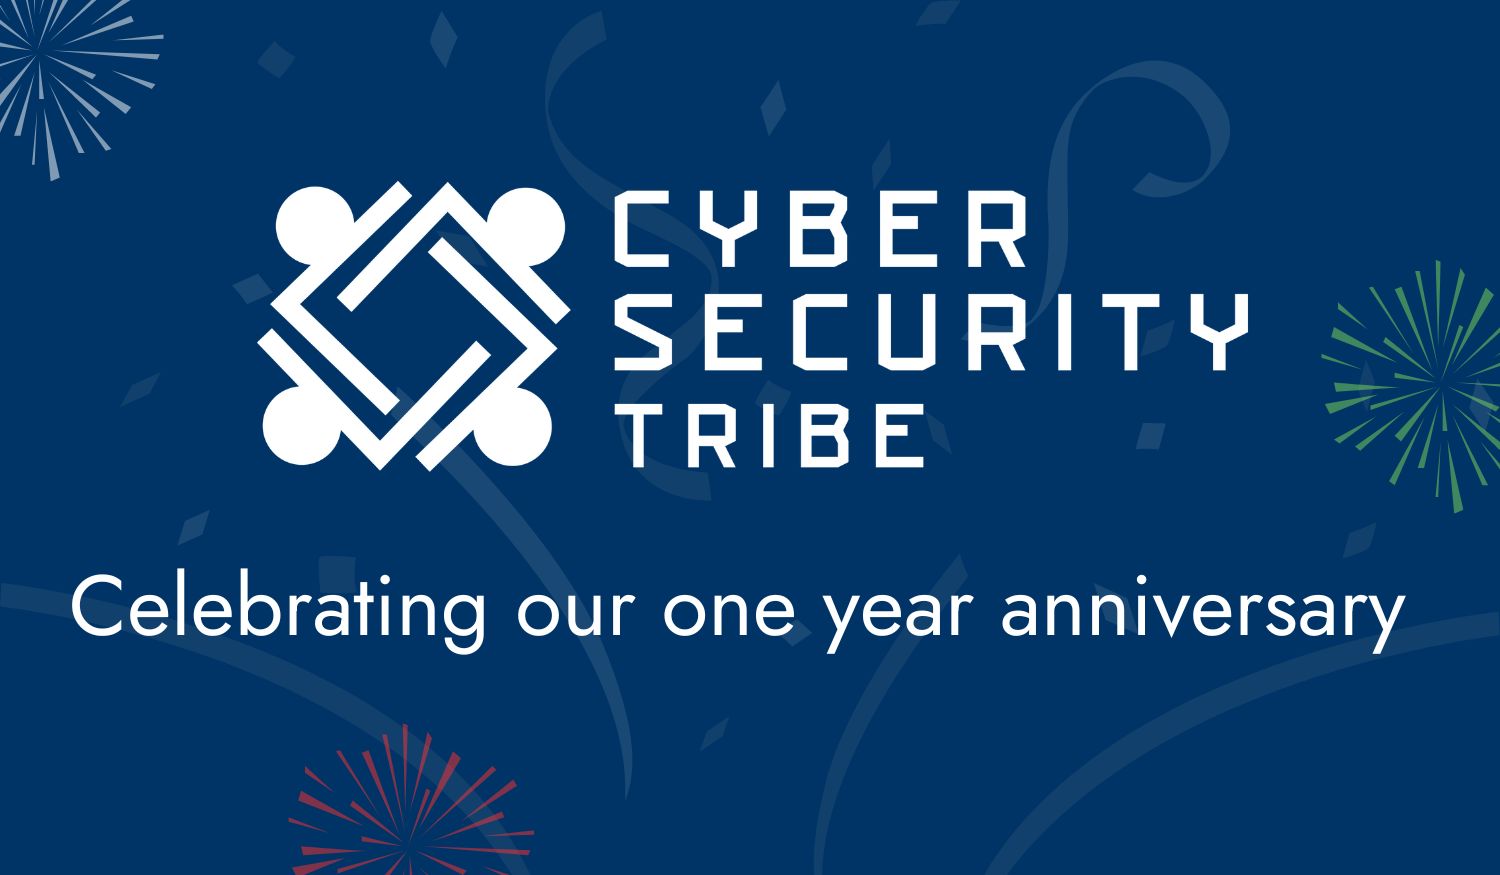 Celebrating Cyber Security Tribe's One Year Anniversary 